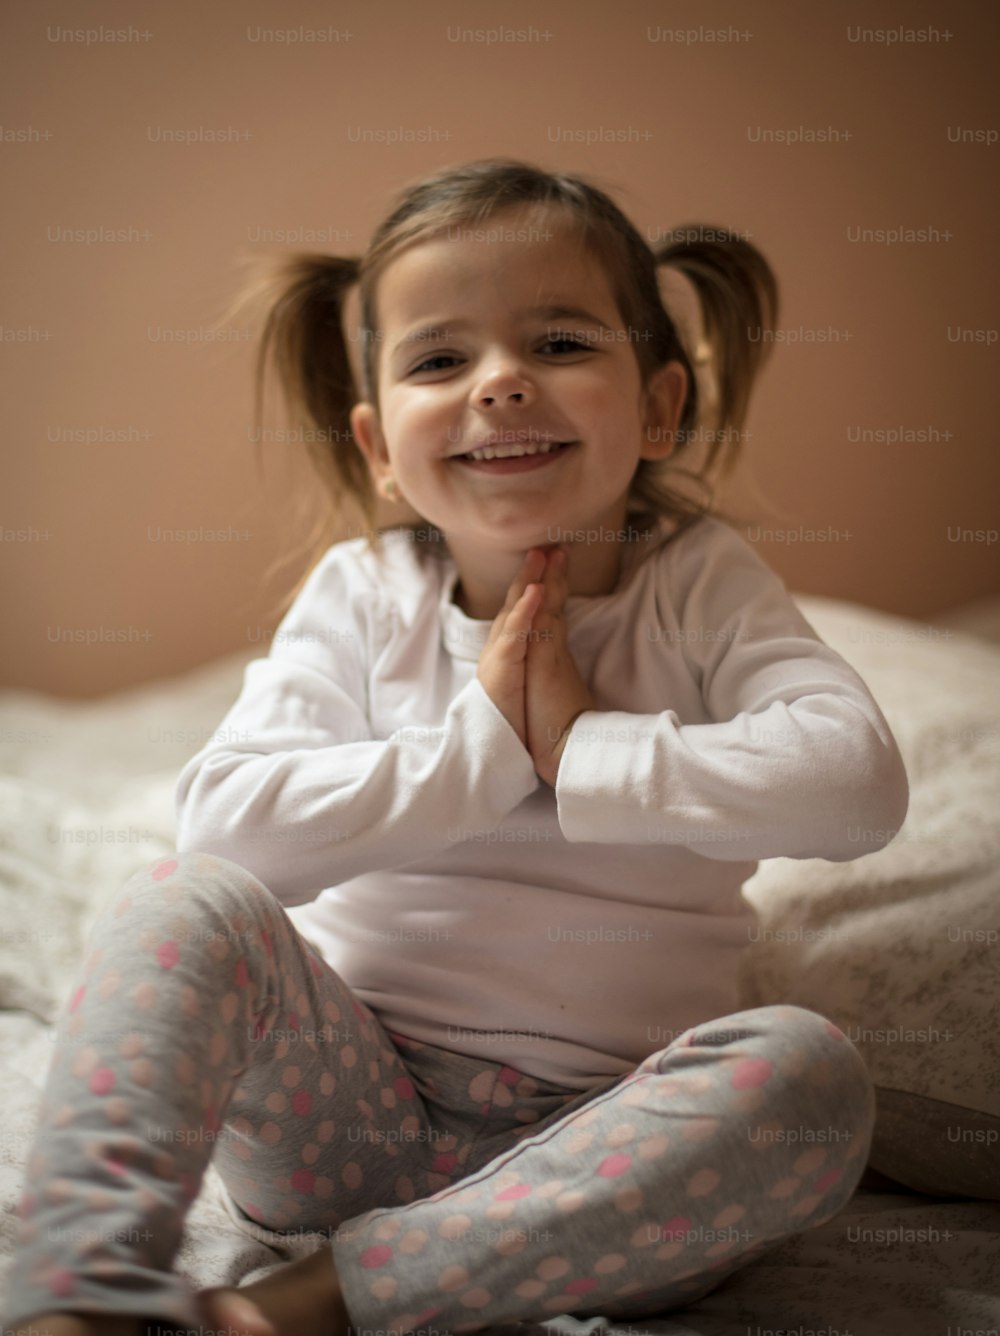 Parents learned to pray before bedtime. Little girl praying on bed. Close up.